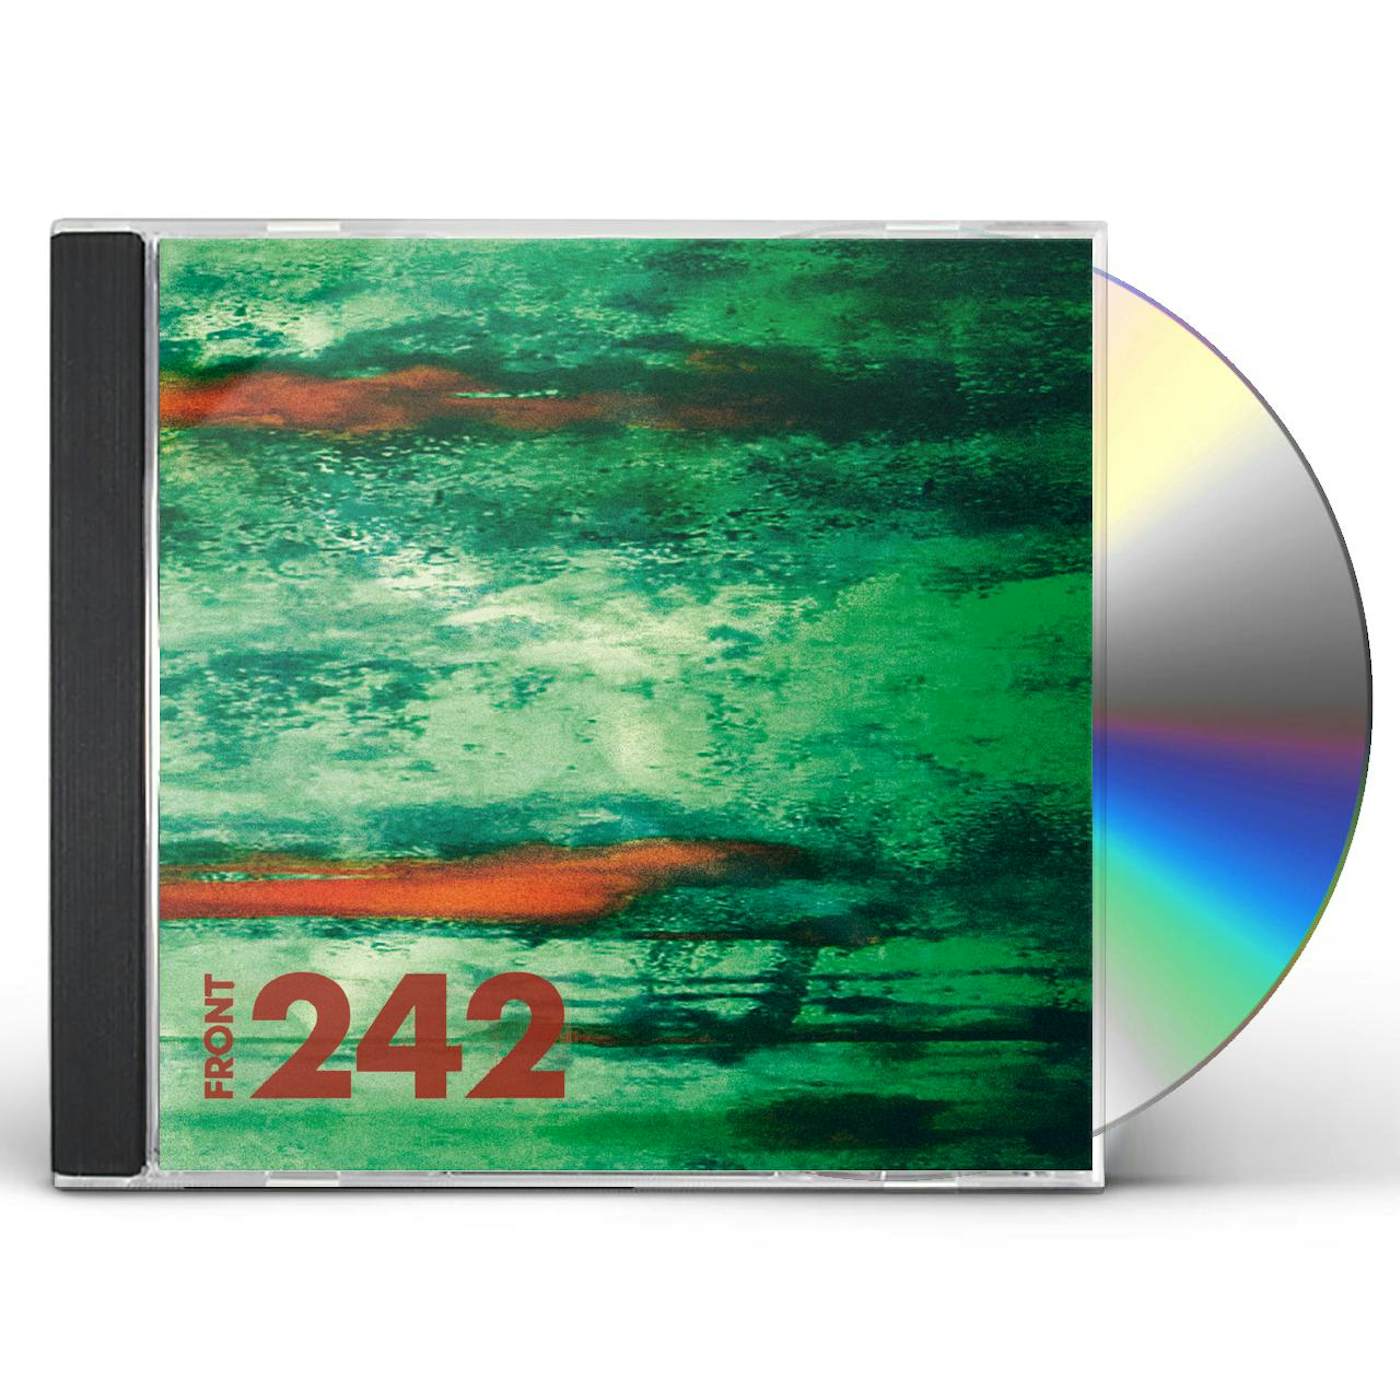 Front 242 USA 91 CD